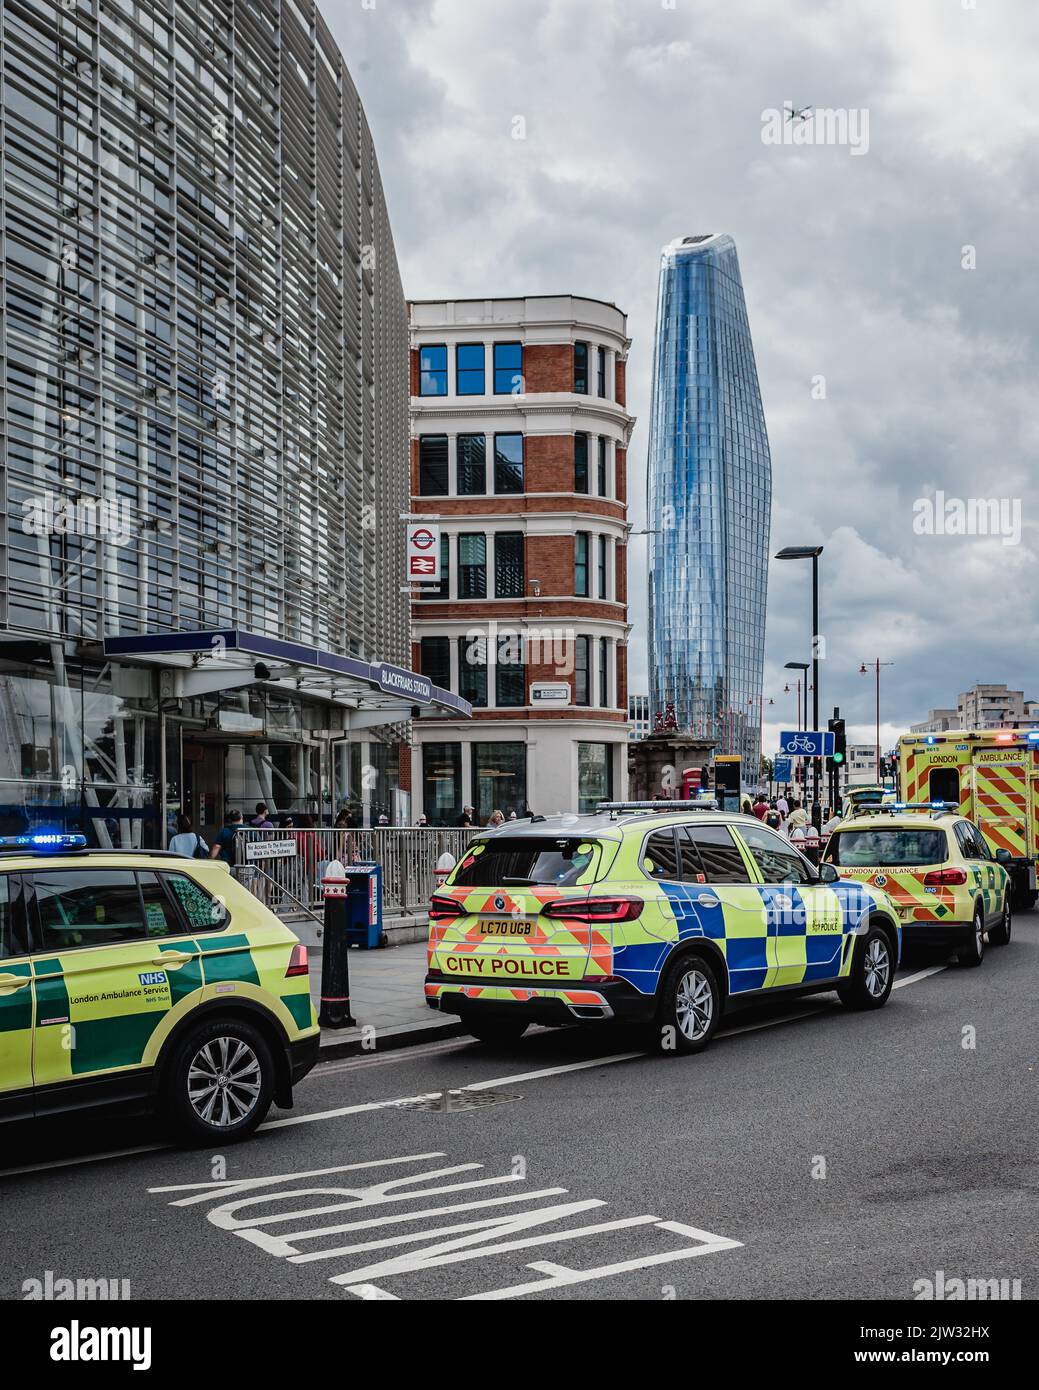 Emergency vehicles attend an incident at Blackfriars Station in London. Stock Photo